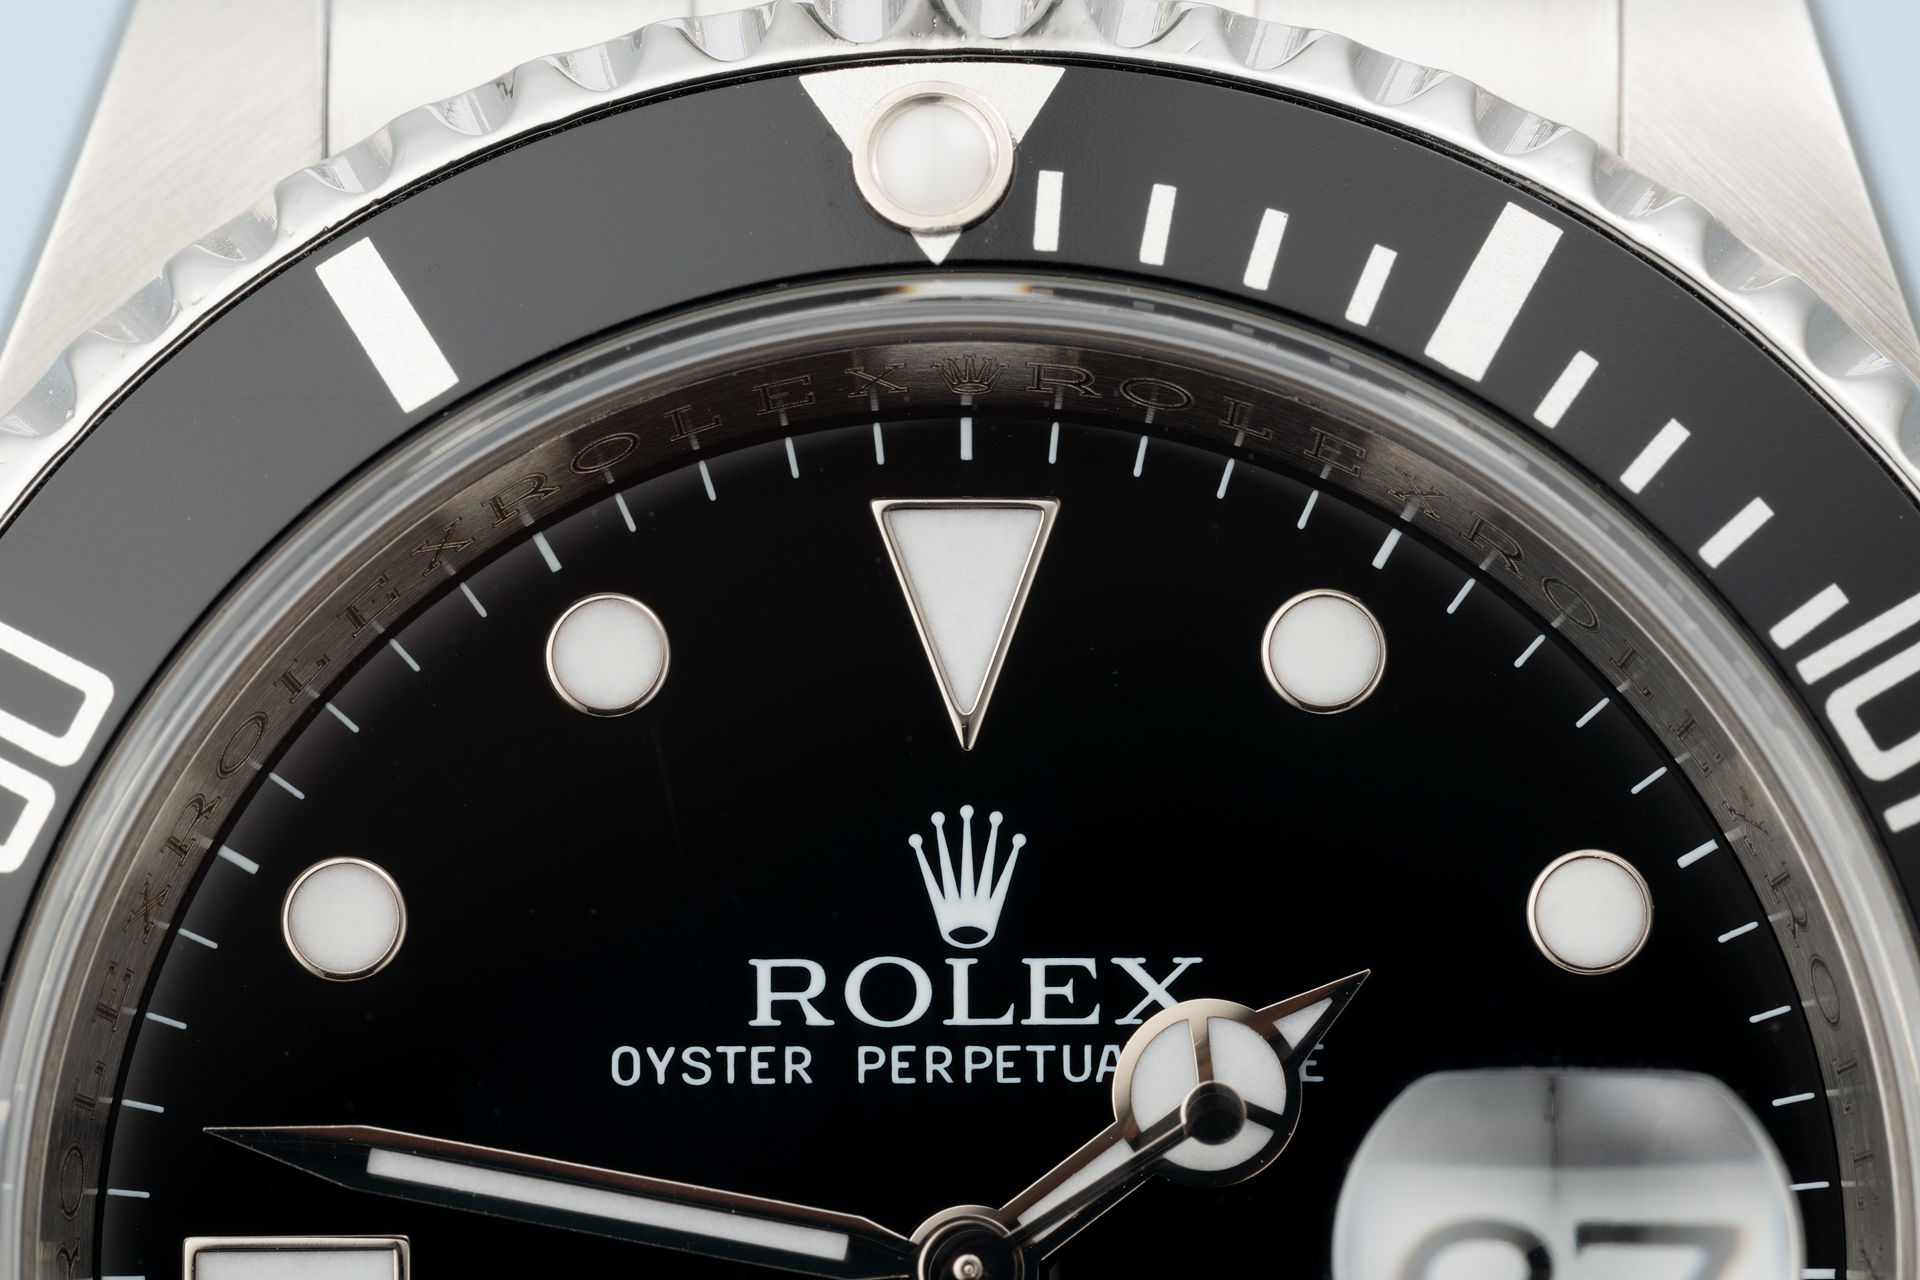 ref 16610 | Extremely Rare 'Final Batch' | Rolex Submariner Date